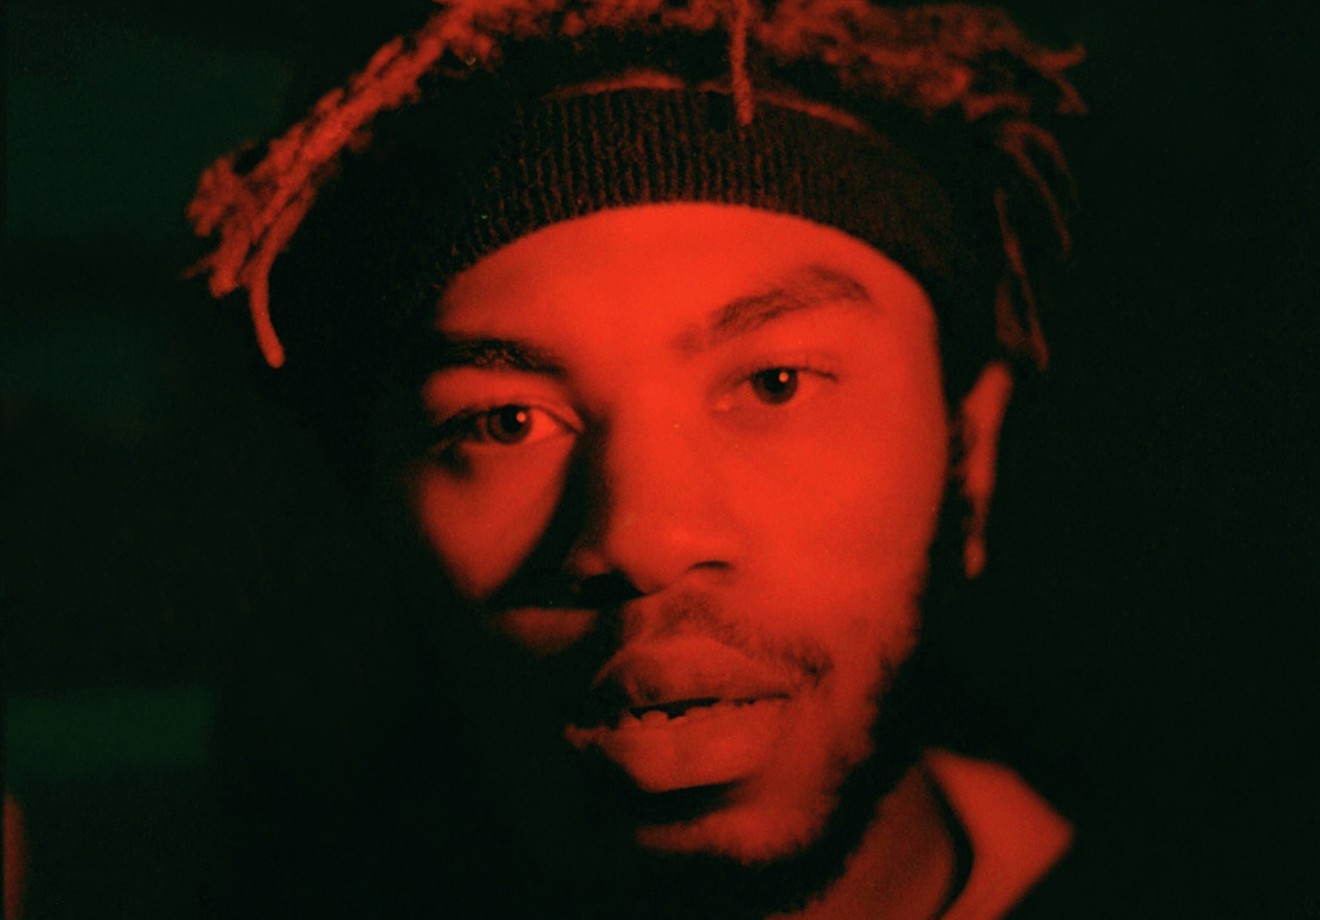 Kevin Abstract wants his music to give lost teenagers hope.